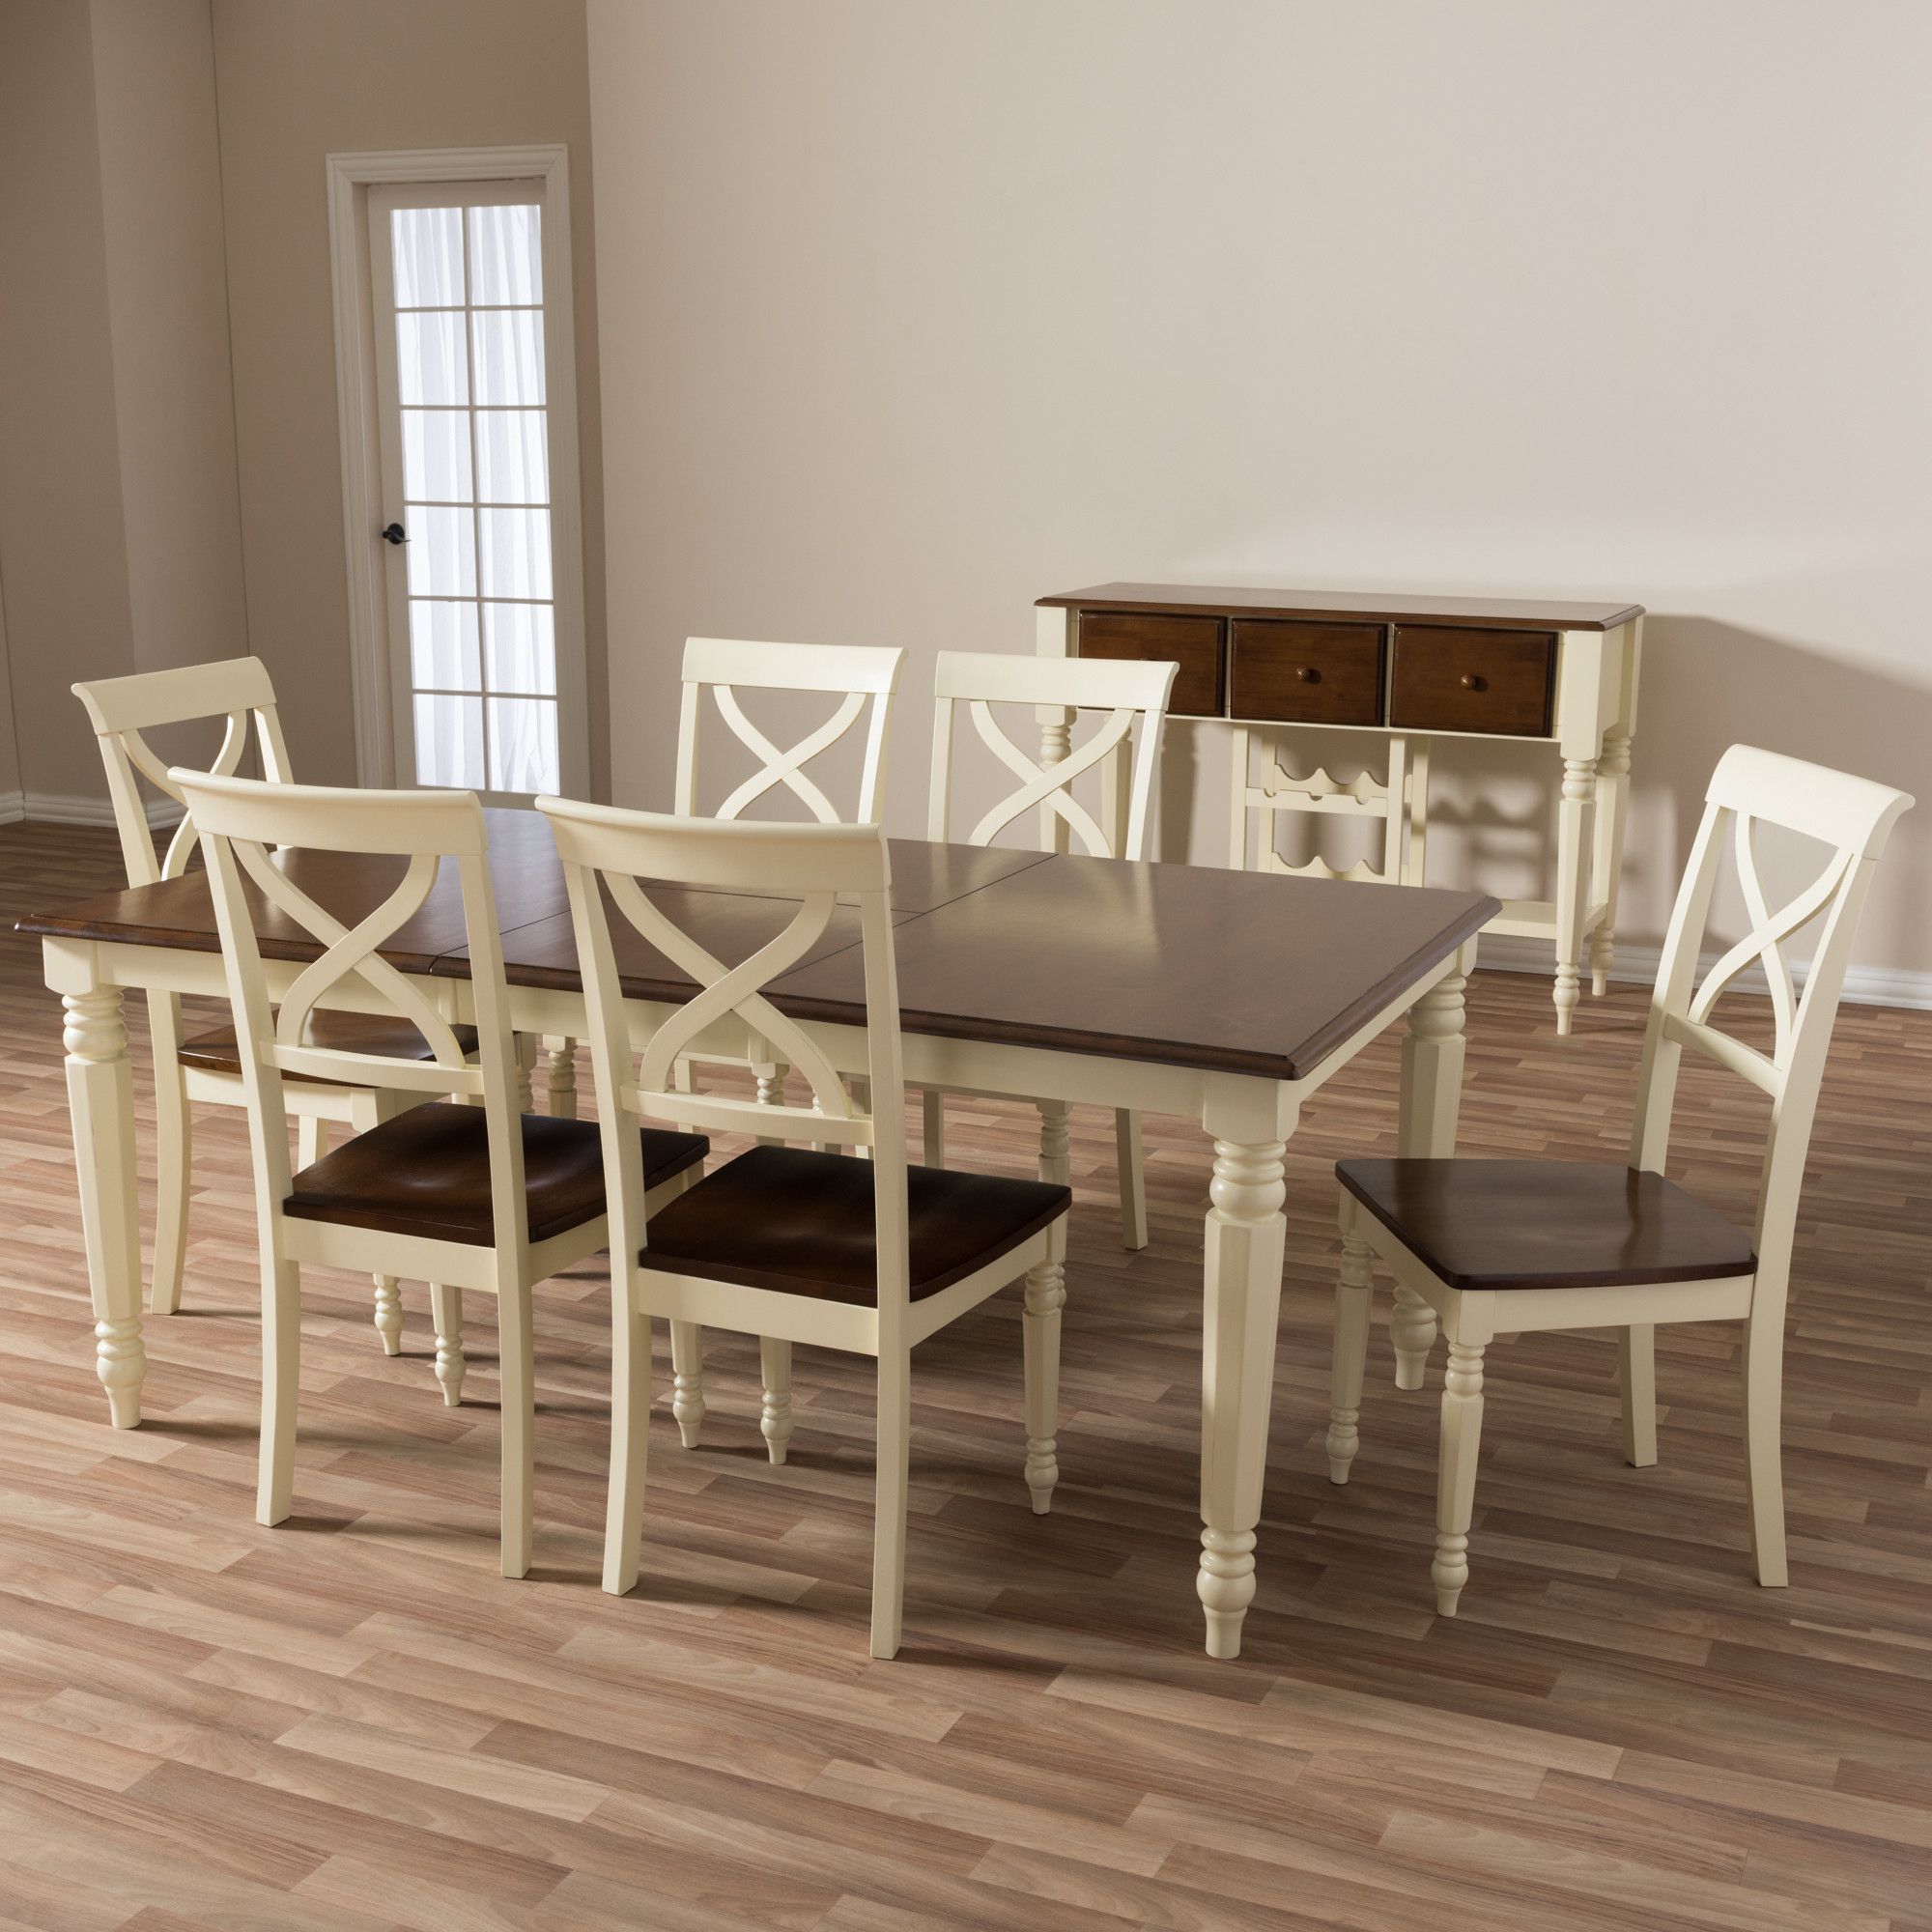 Favorite Wholesale Dining Sets. Room Pier One (View 18 of 20)